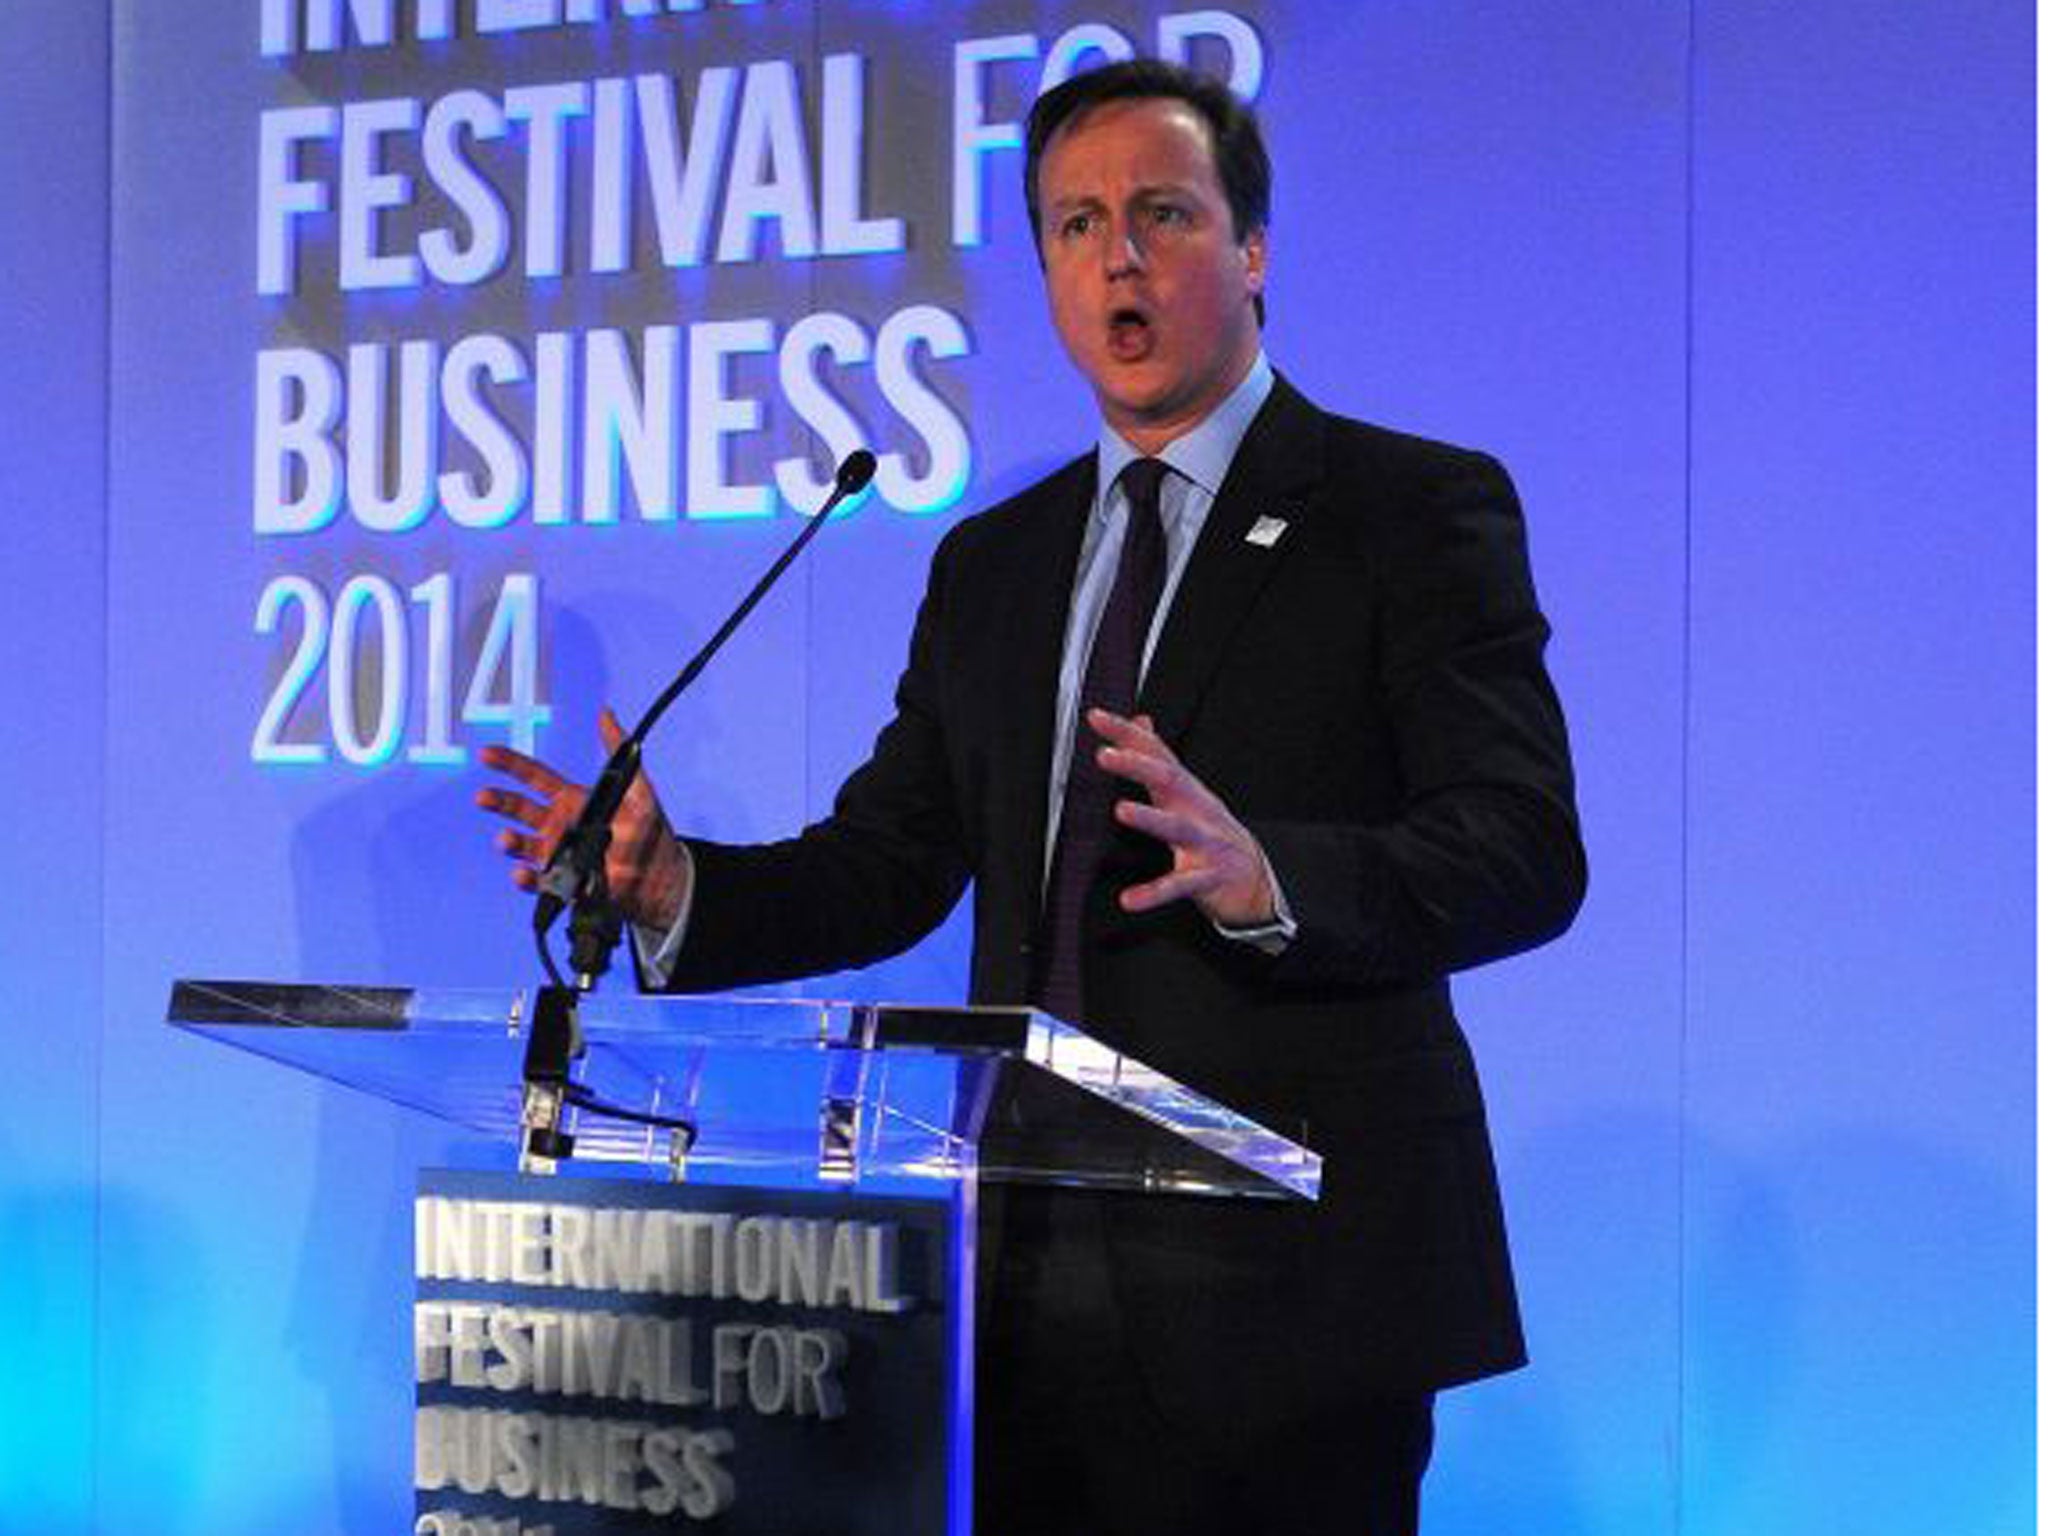 David Cameron addresses business leaders in Liverpool this week